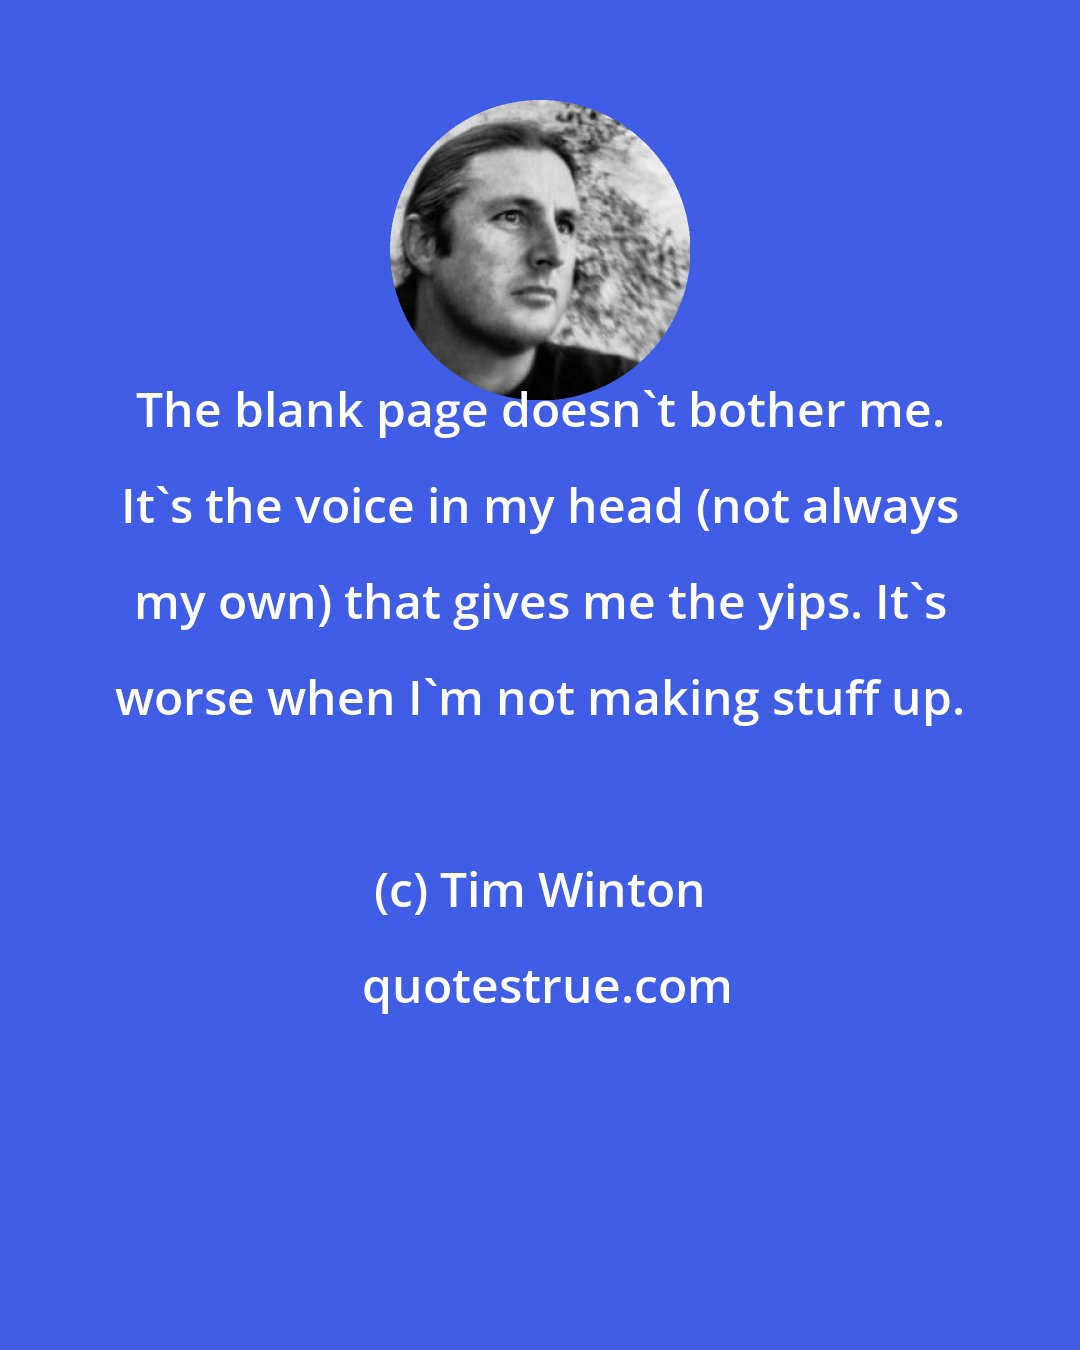 Tim Winton: The blank page doesn't bother me. It's the voice in my head (not always my own) that gives me the yips. It's worse when I'm not making stuff up.